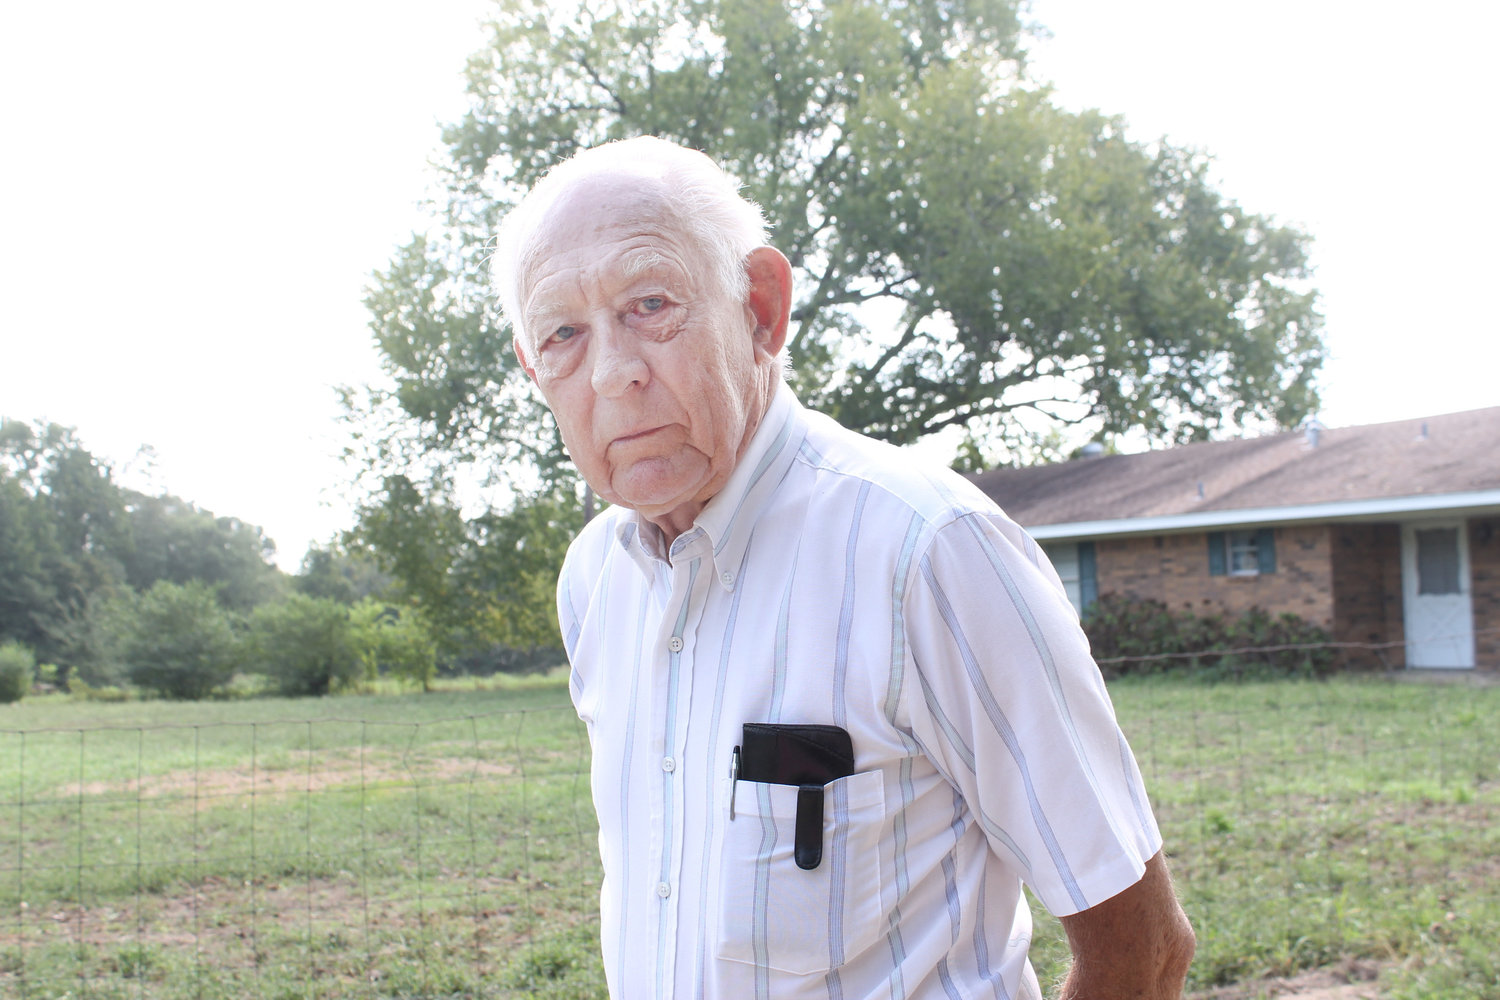 Retirement reward – After retiring as an airline mechanic, Leo Hala moved to property that his grandfather bought in 1912 west of Mineola and is happy to be on his family’s land.